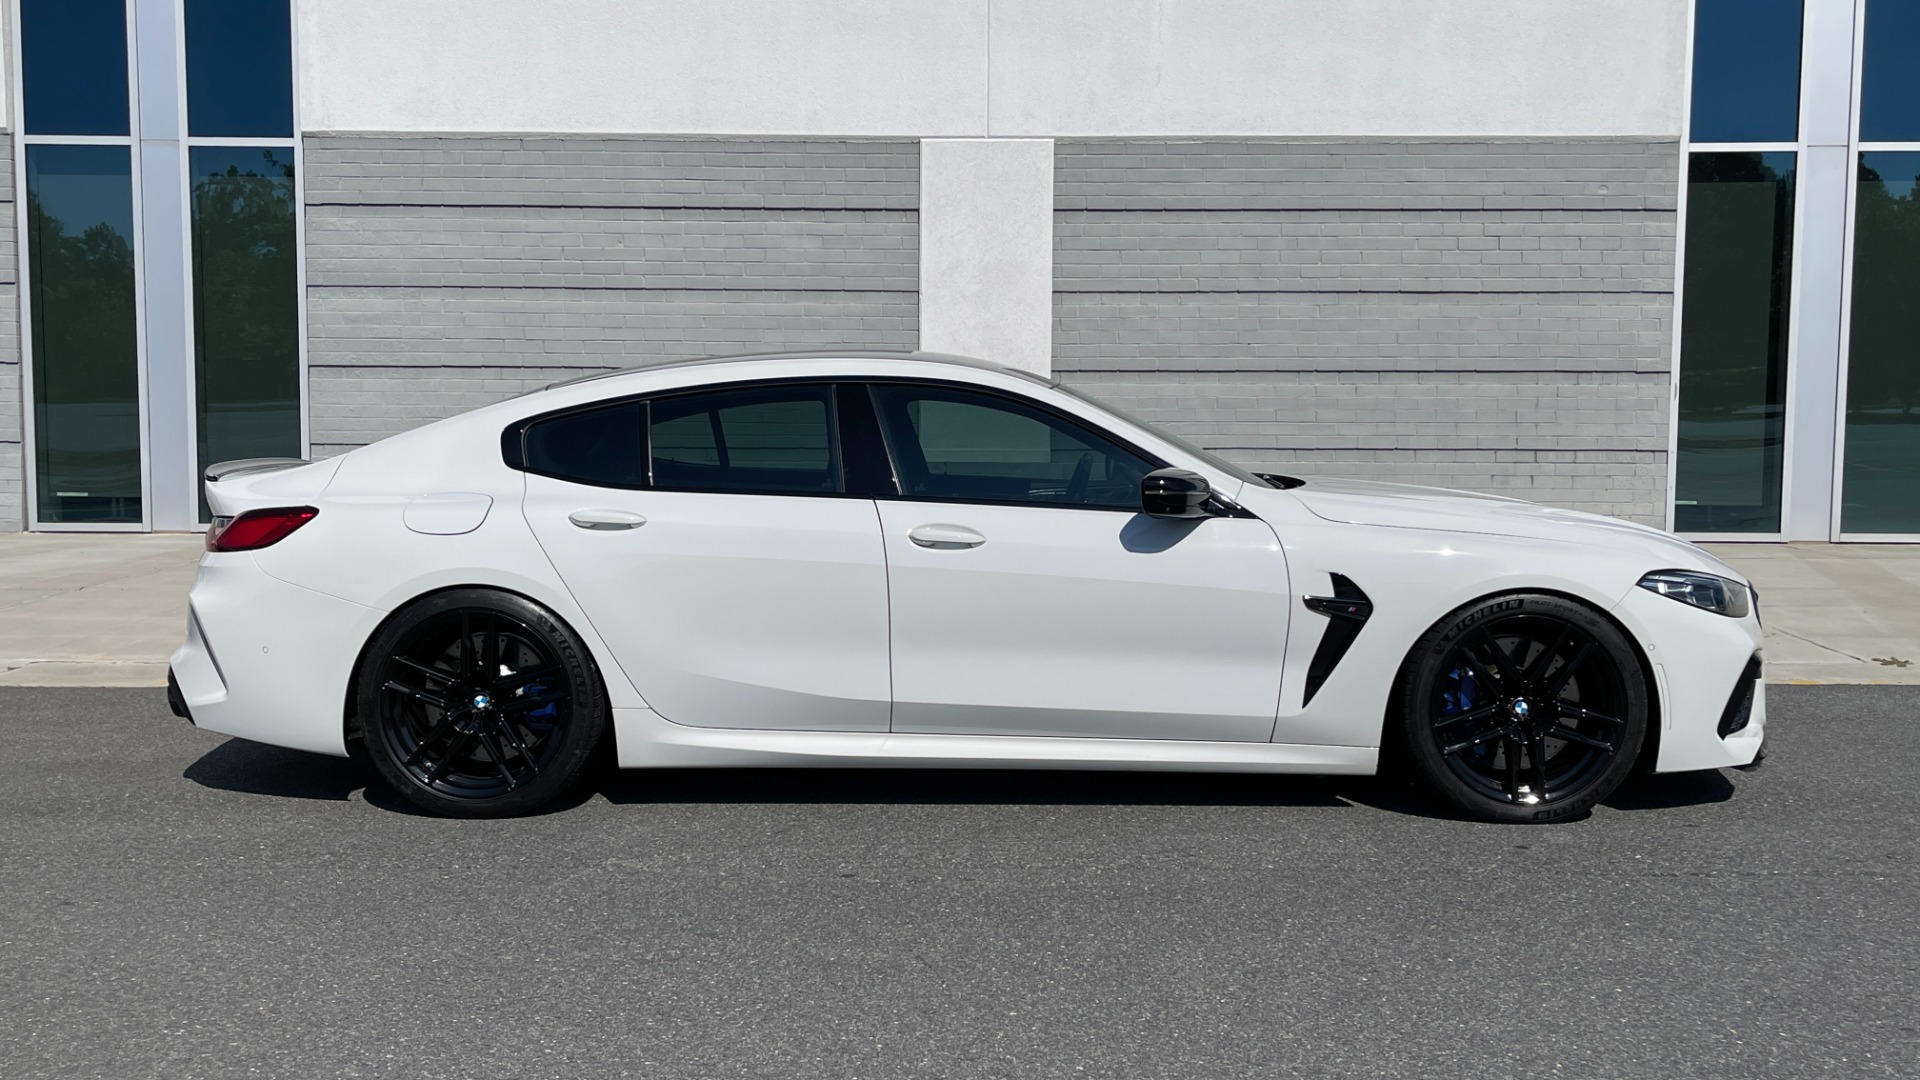 Used 2020 BMW M8 COMPETITON / TWIN TURBO / KW V3 SUSPENSION / FRONT LIFT / PPF / CERAMIC COA for sale Sold at Formula Imports in Charlotte NC 28227 5